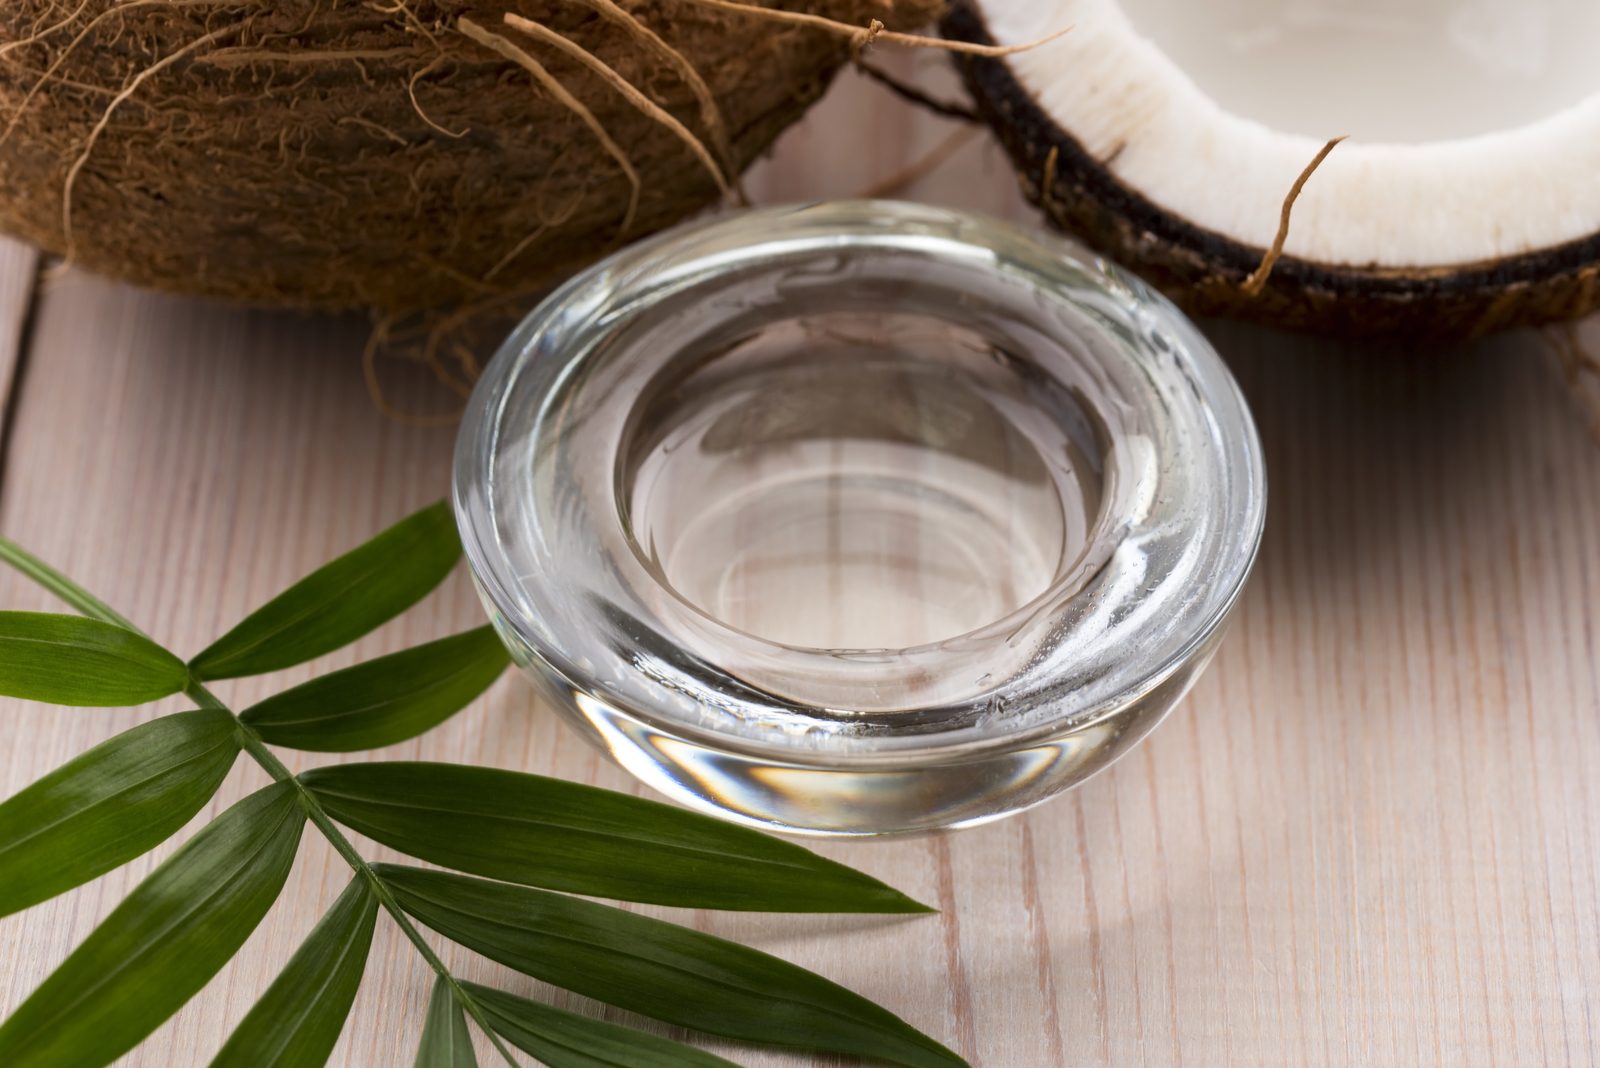 clear oil in a glass bowl next to coconut halves